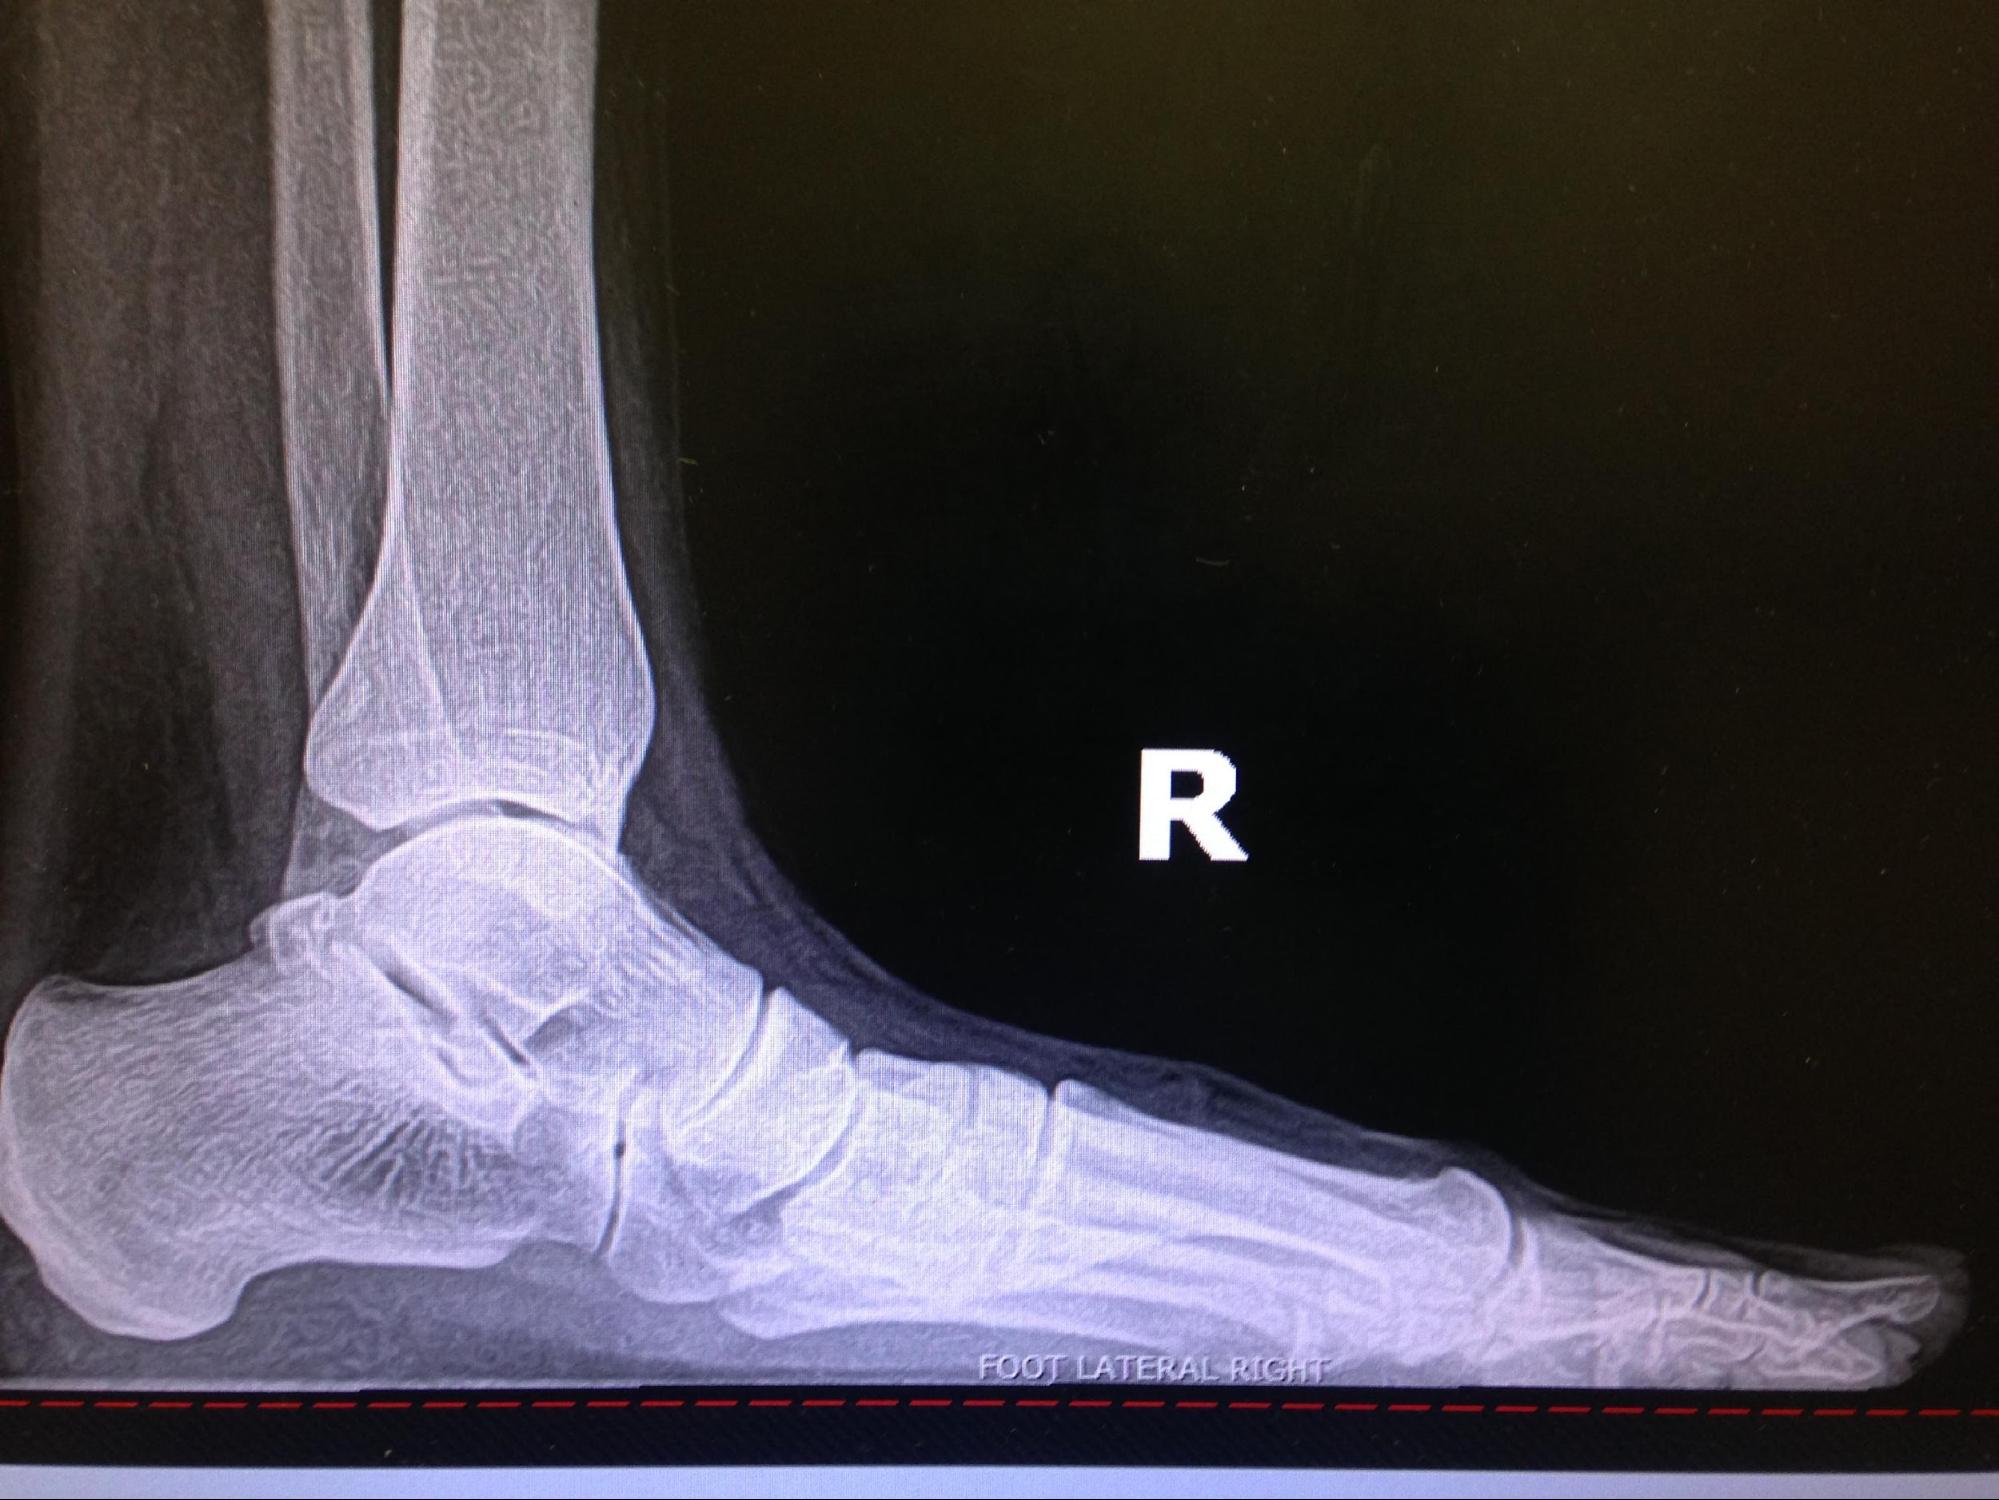 Pes Planus
Note the lack of the longitudinal arch, increased talar declination, and decreased calcaneal pitch. 